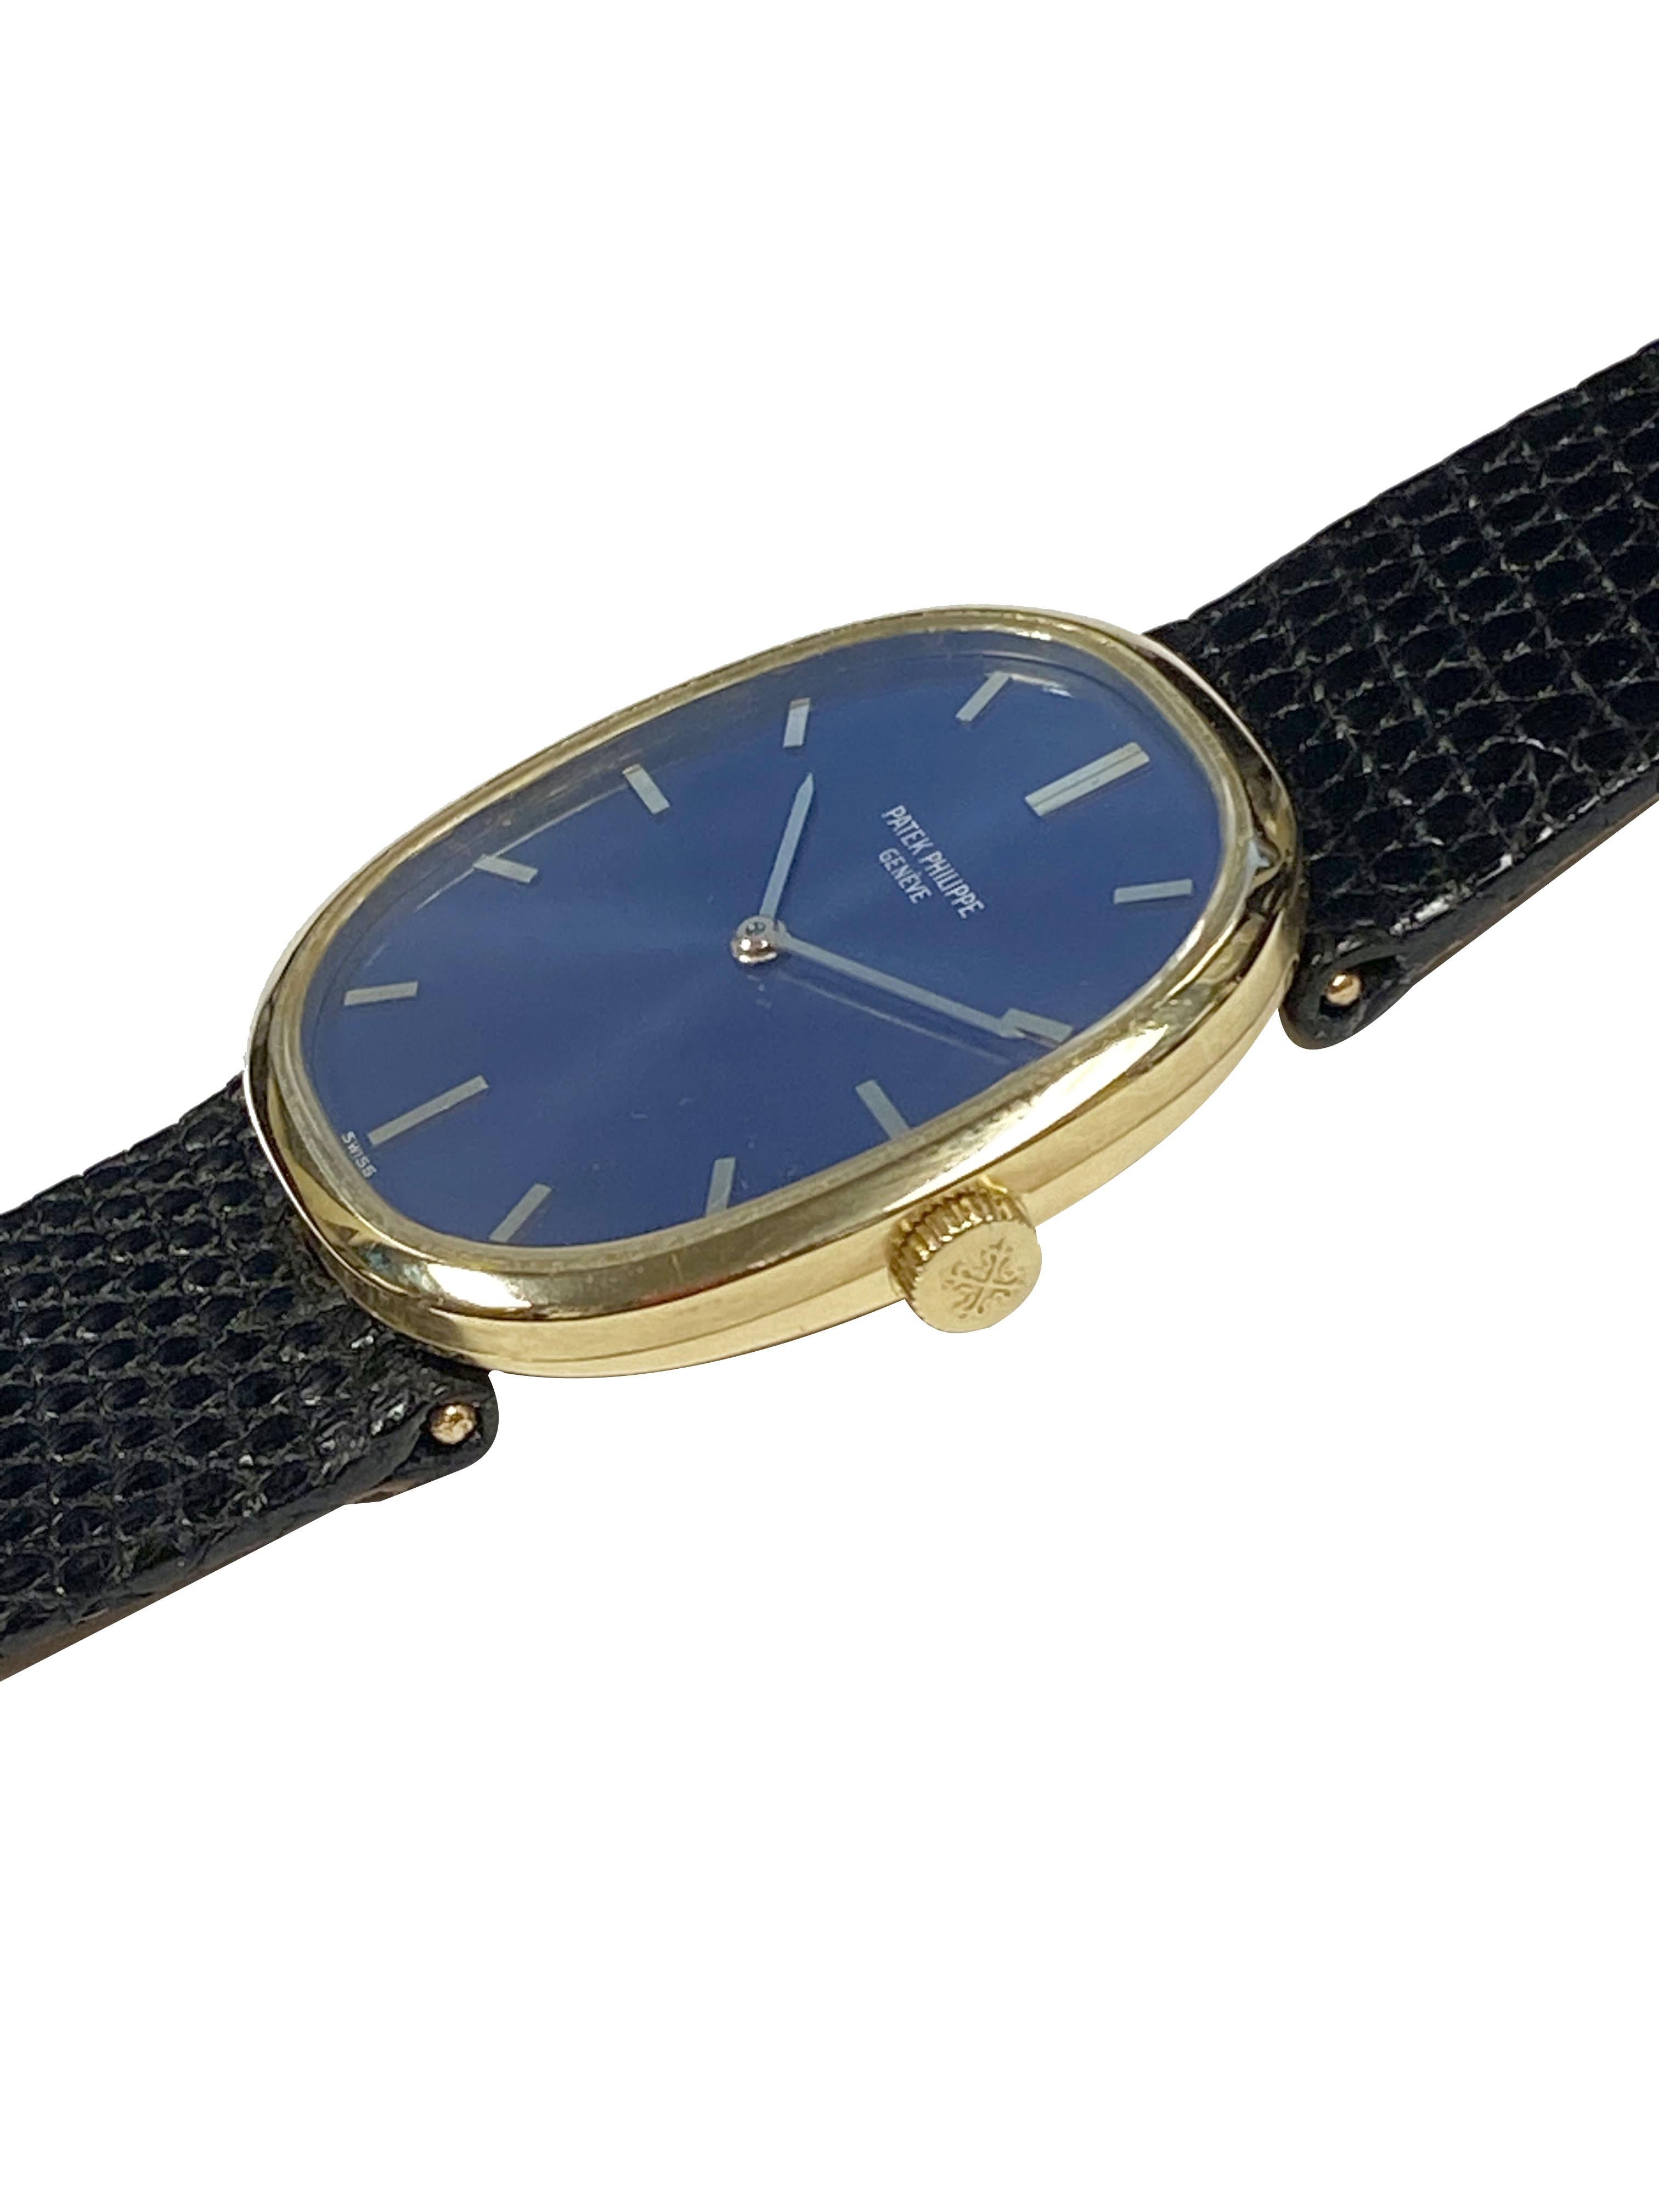 Circa 1990s Patek Philippe Reference 3548 Ellipse Wrist Watch,  32 X 27 M.M. 18K Yellow Gold 3 Piece case, Caliber 215, 18 Jewel, mechanical, manual wind movement. Blue Satin Dial with Raised Gold markers, Sapphire glass crystal, Patek Philipppe